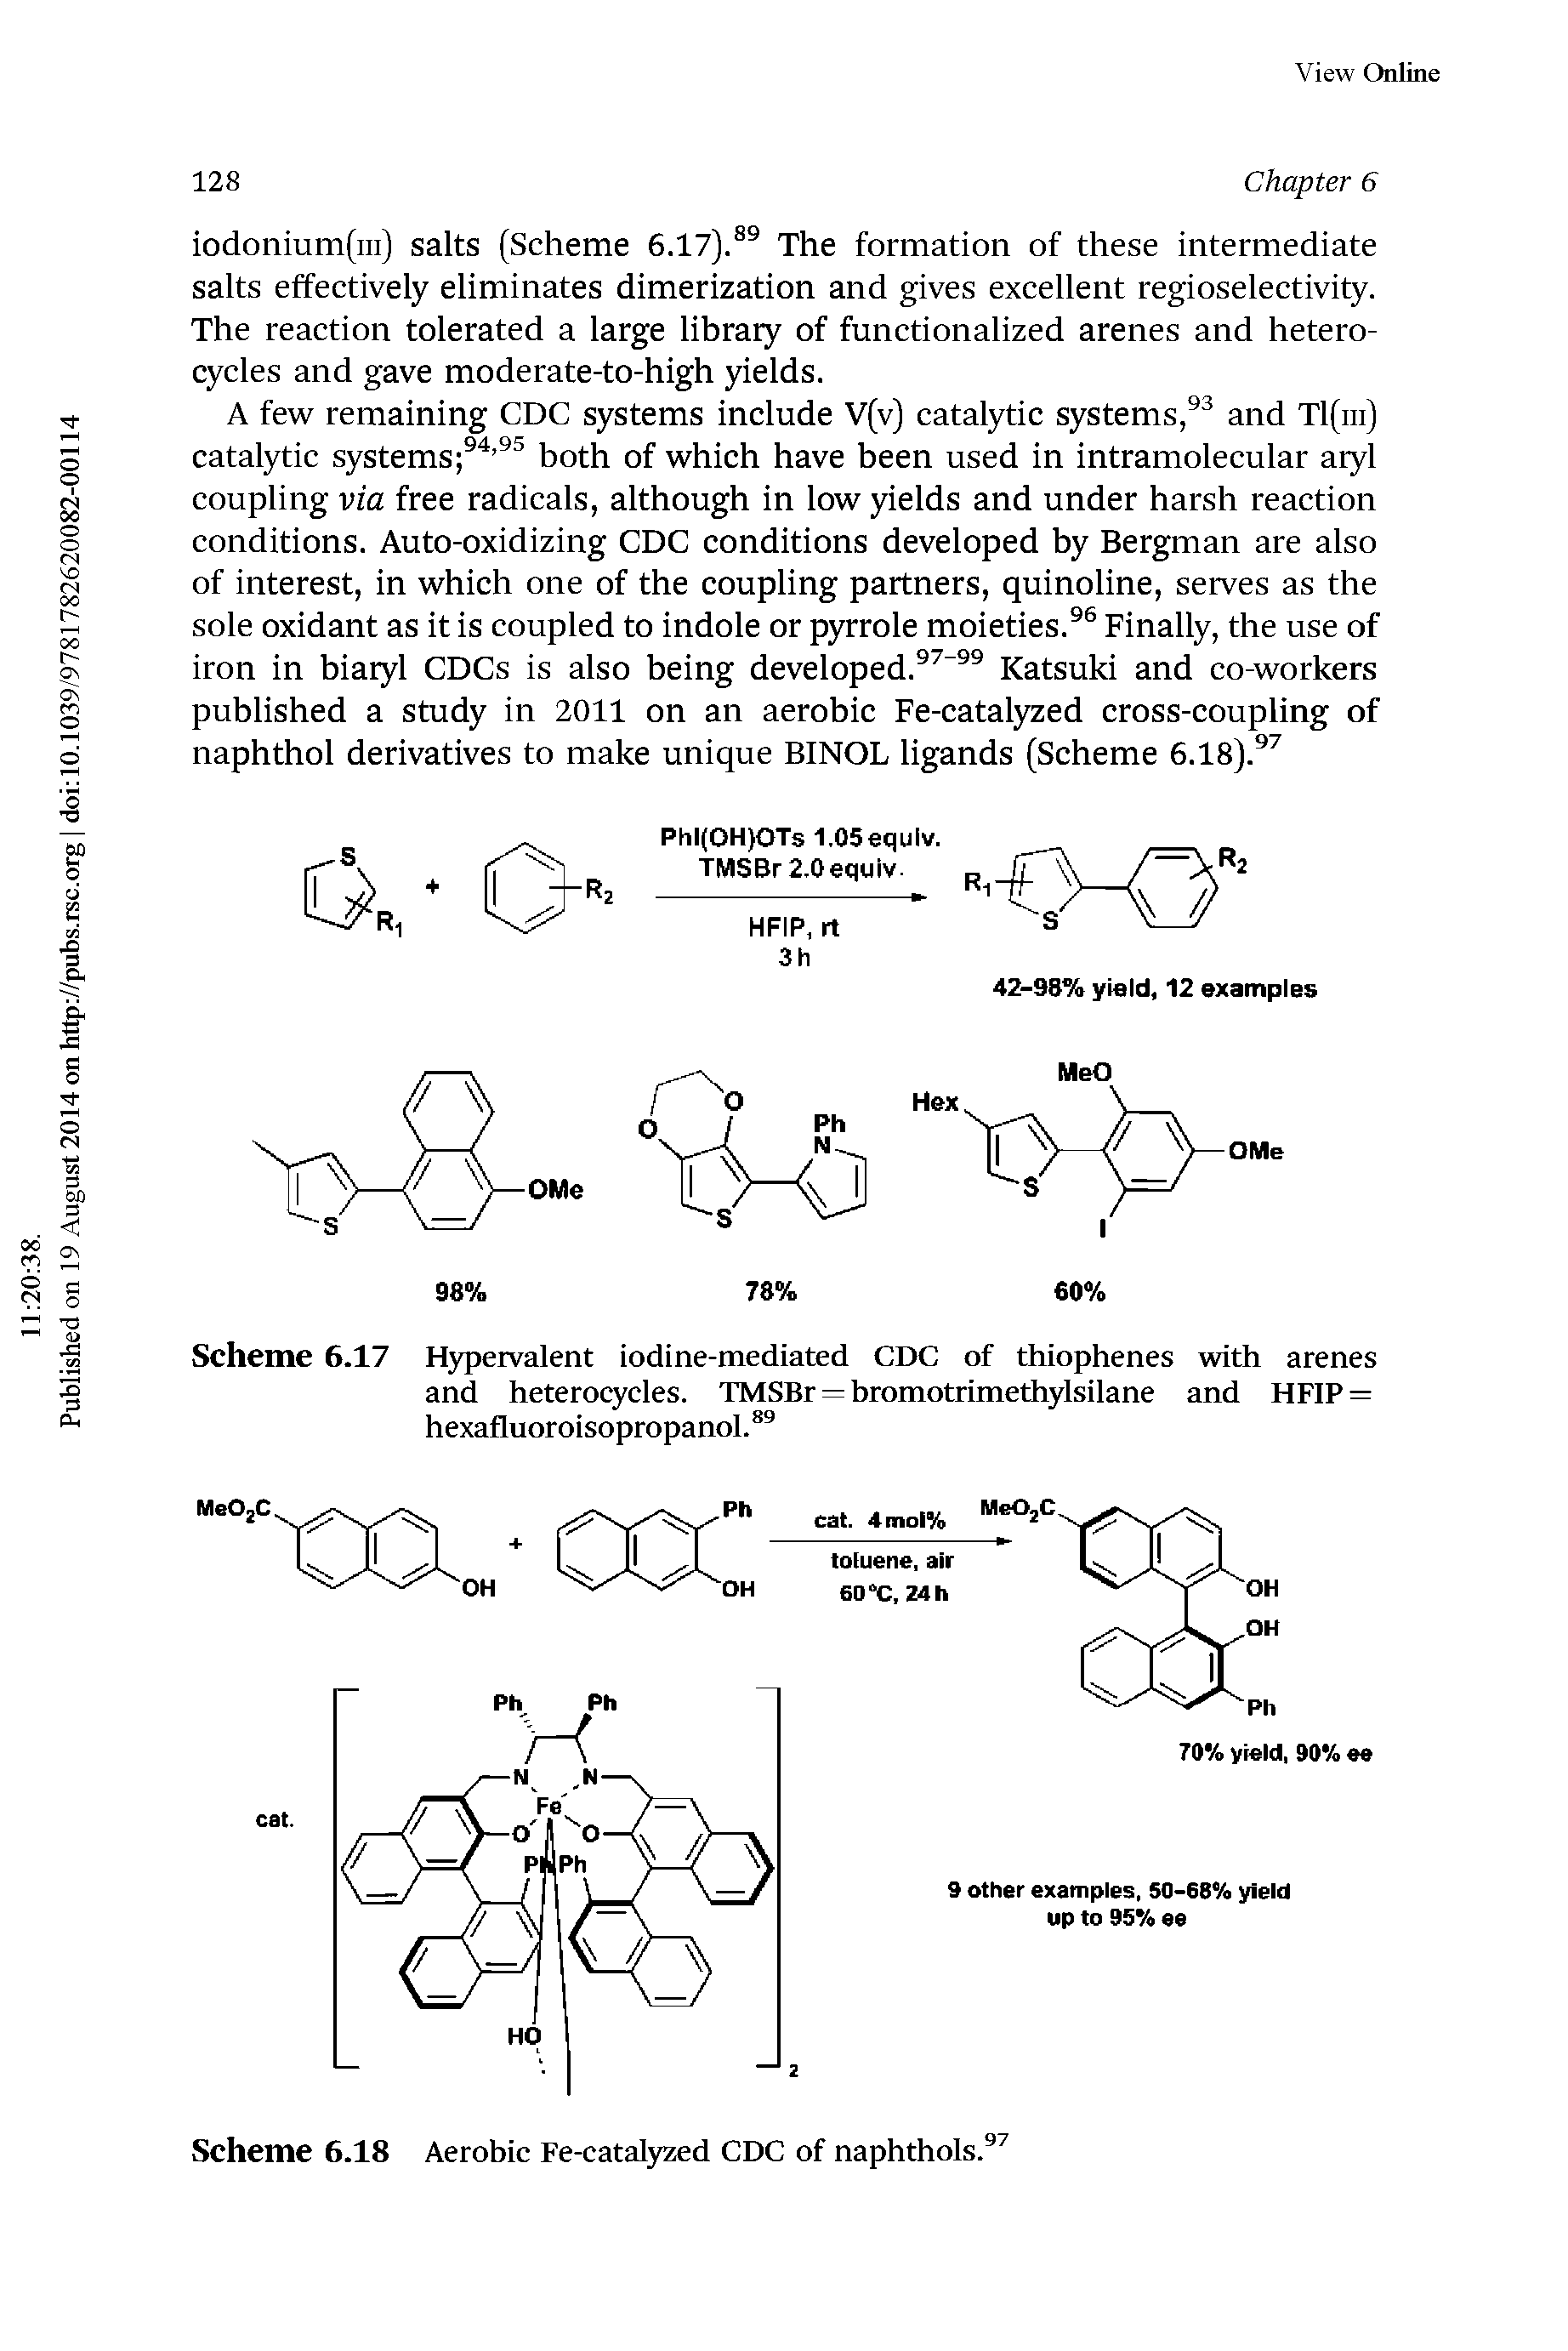 Scheme 6.17 H3 pervalent iodine-mediated CDC of thiophenes with arenes and heterocycles. TMSBr = hromotrimethylsilane and HFIP = hexafluoroisopropanol. ...